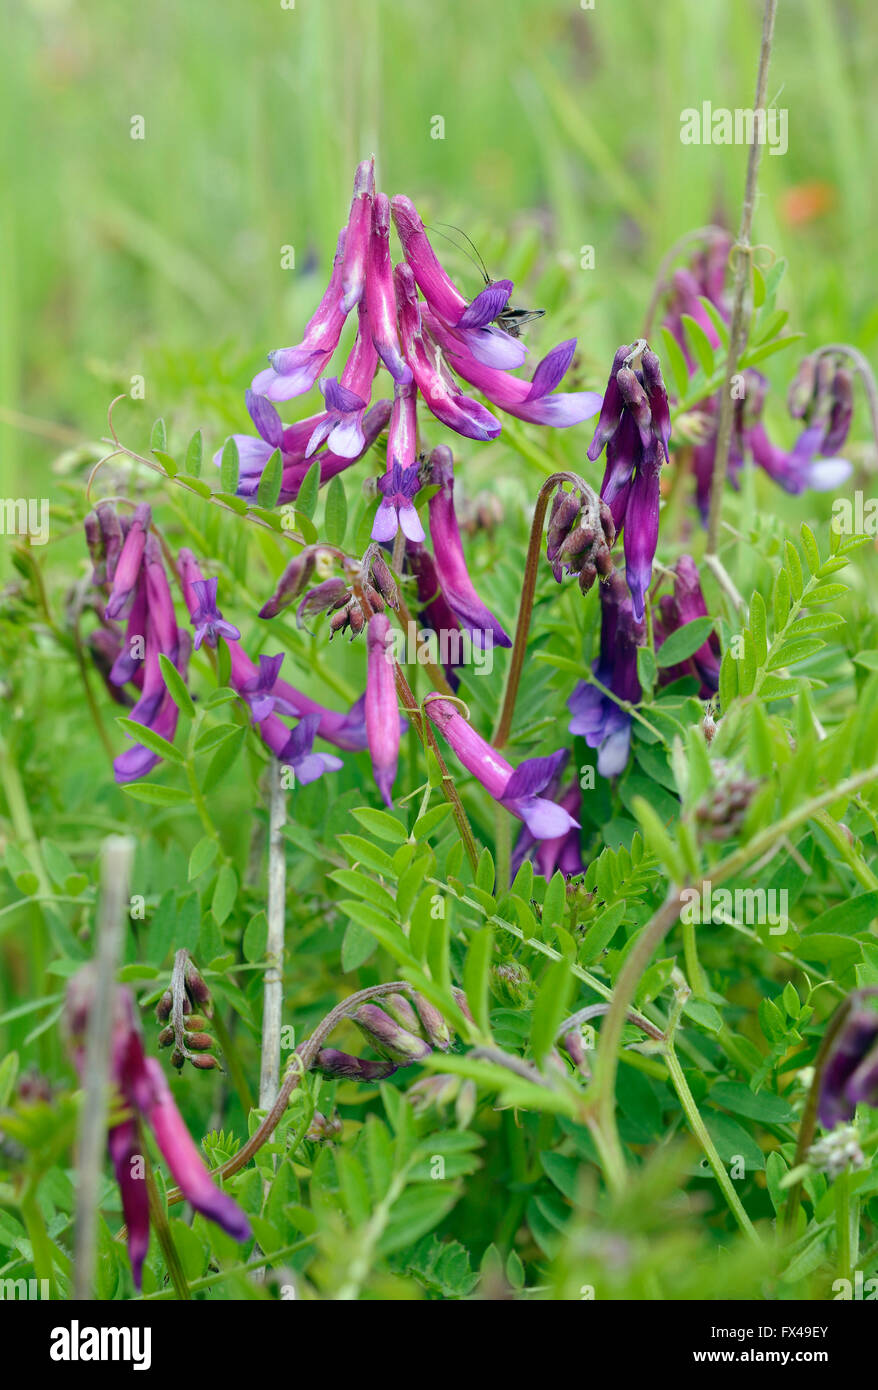 Wooly or Fodder Vetch - Vicia villosa Cyprus Stock Photo